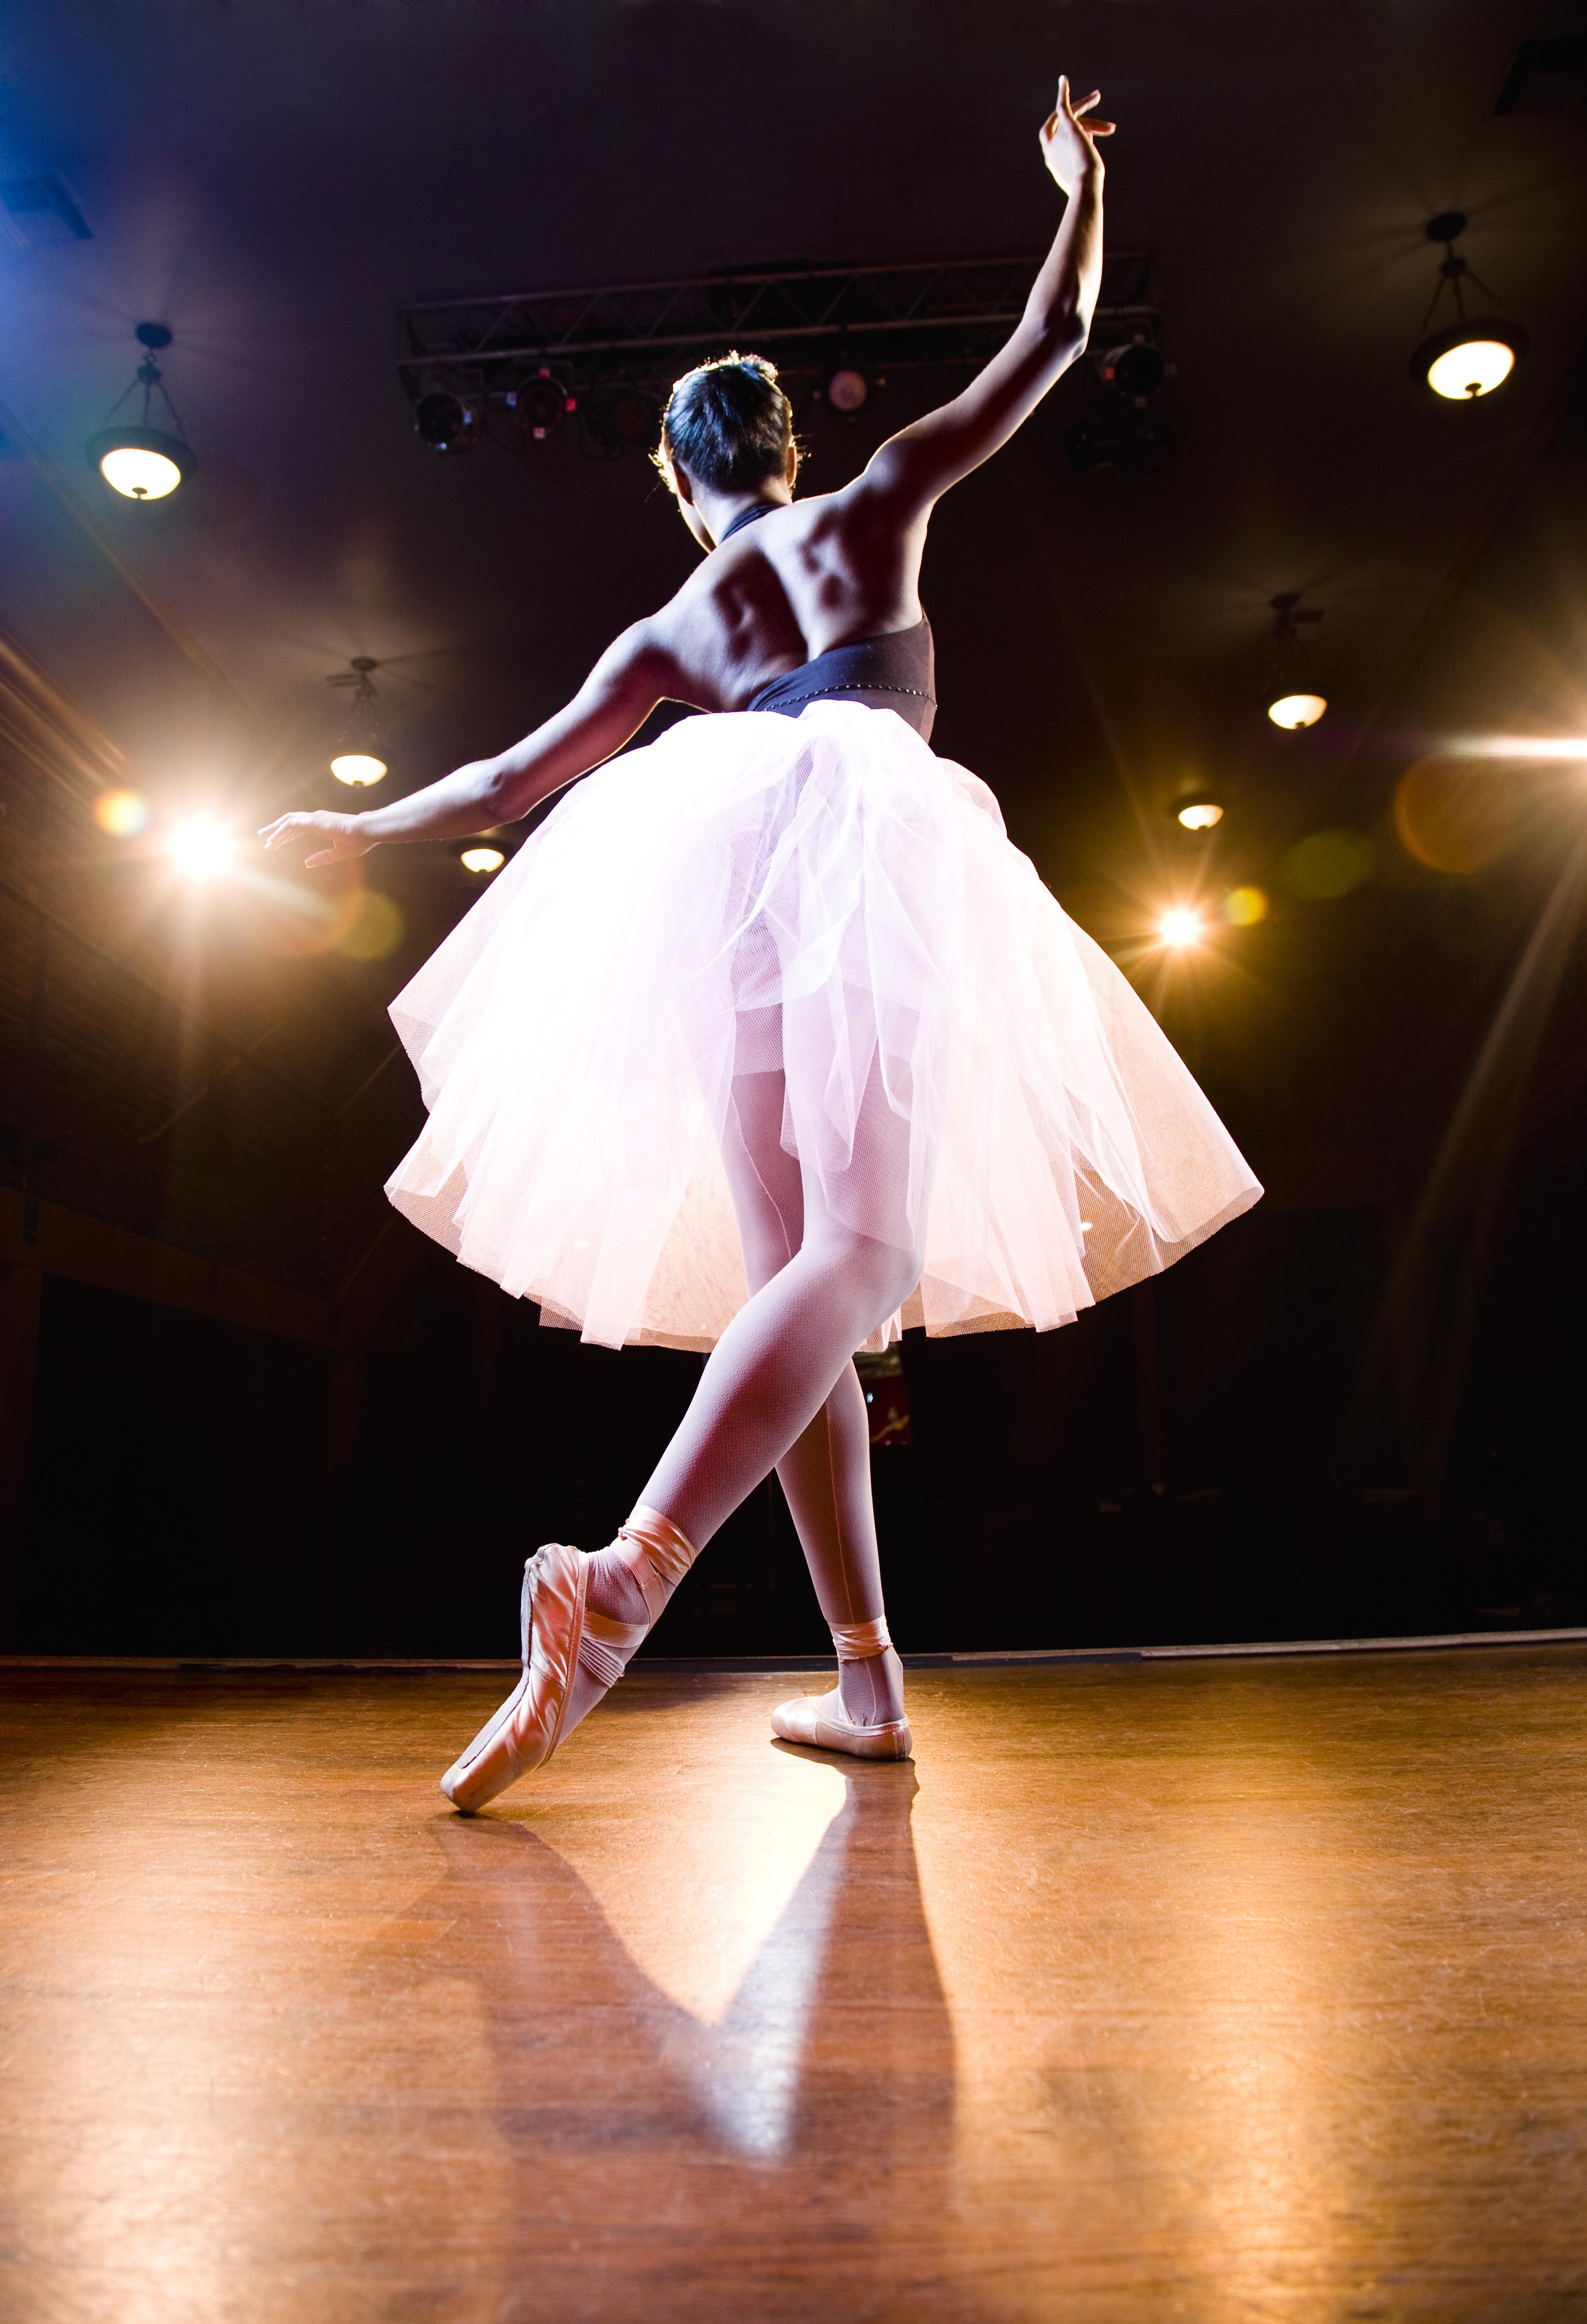 Female ballerina on stage dancing